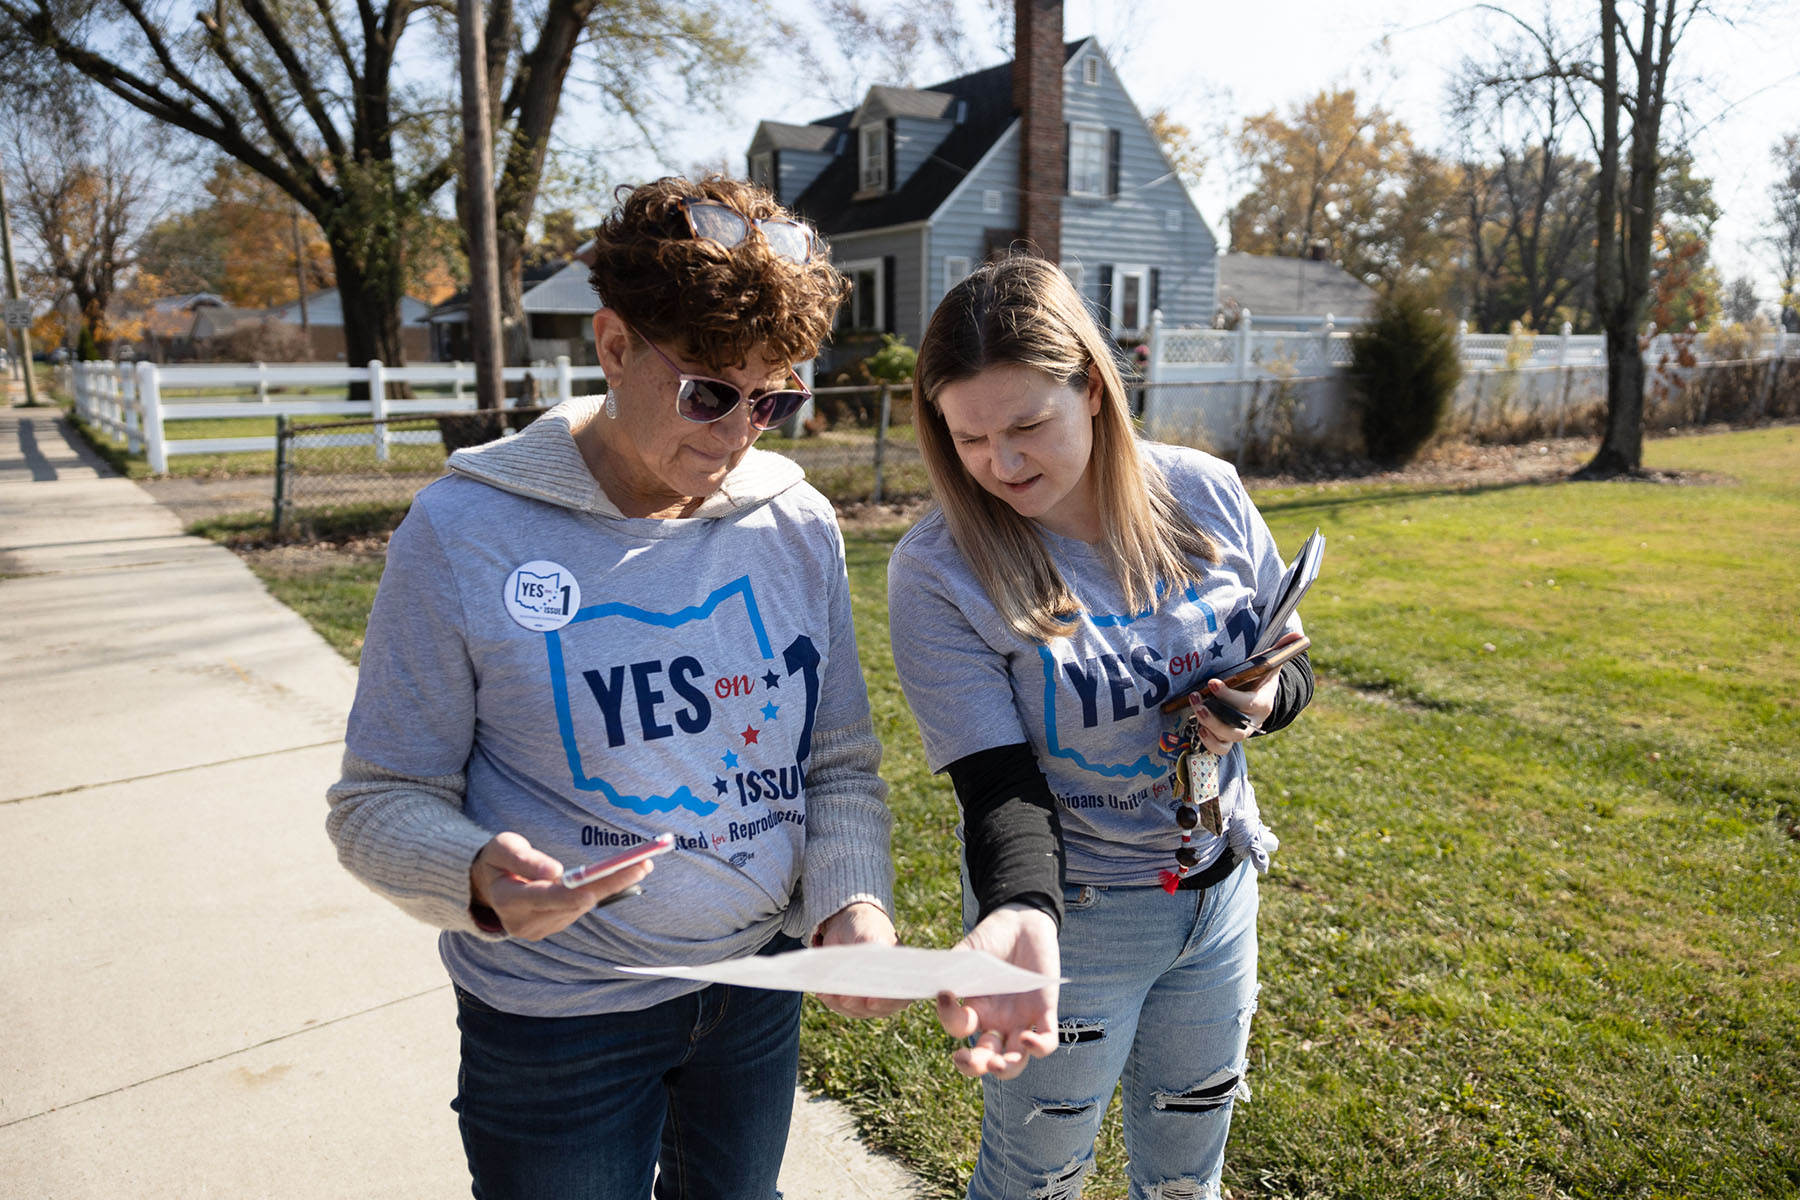 Abortion rights canvasser look at a map of a neighborhood before canvassing ahead of the general election.